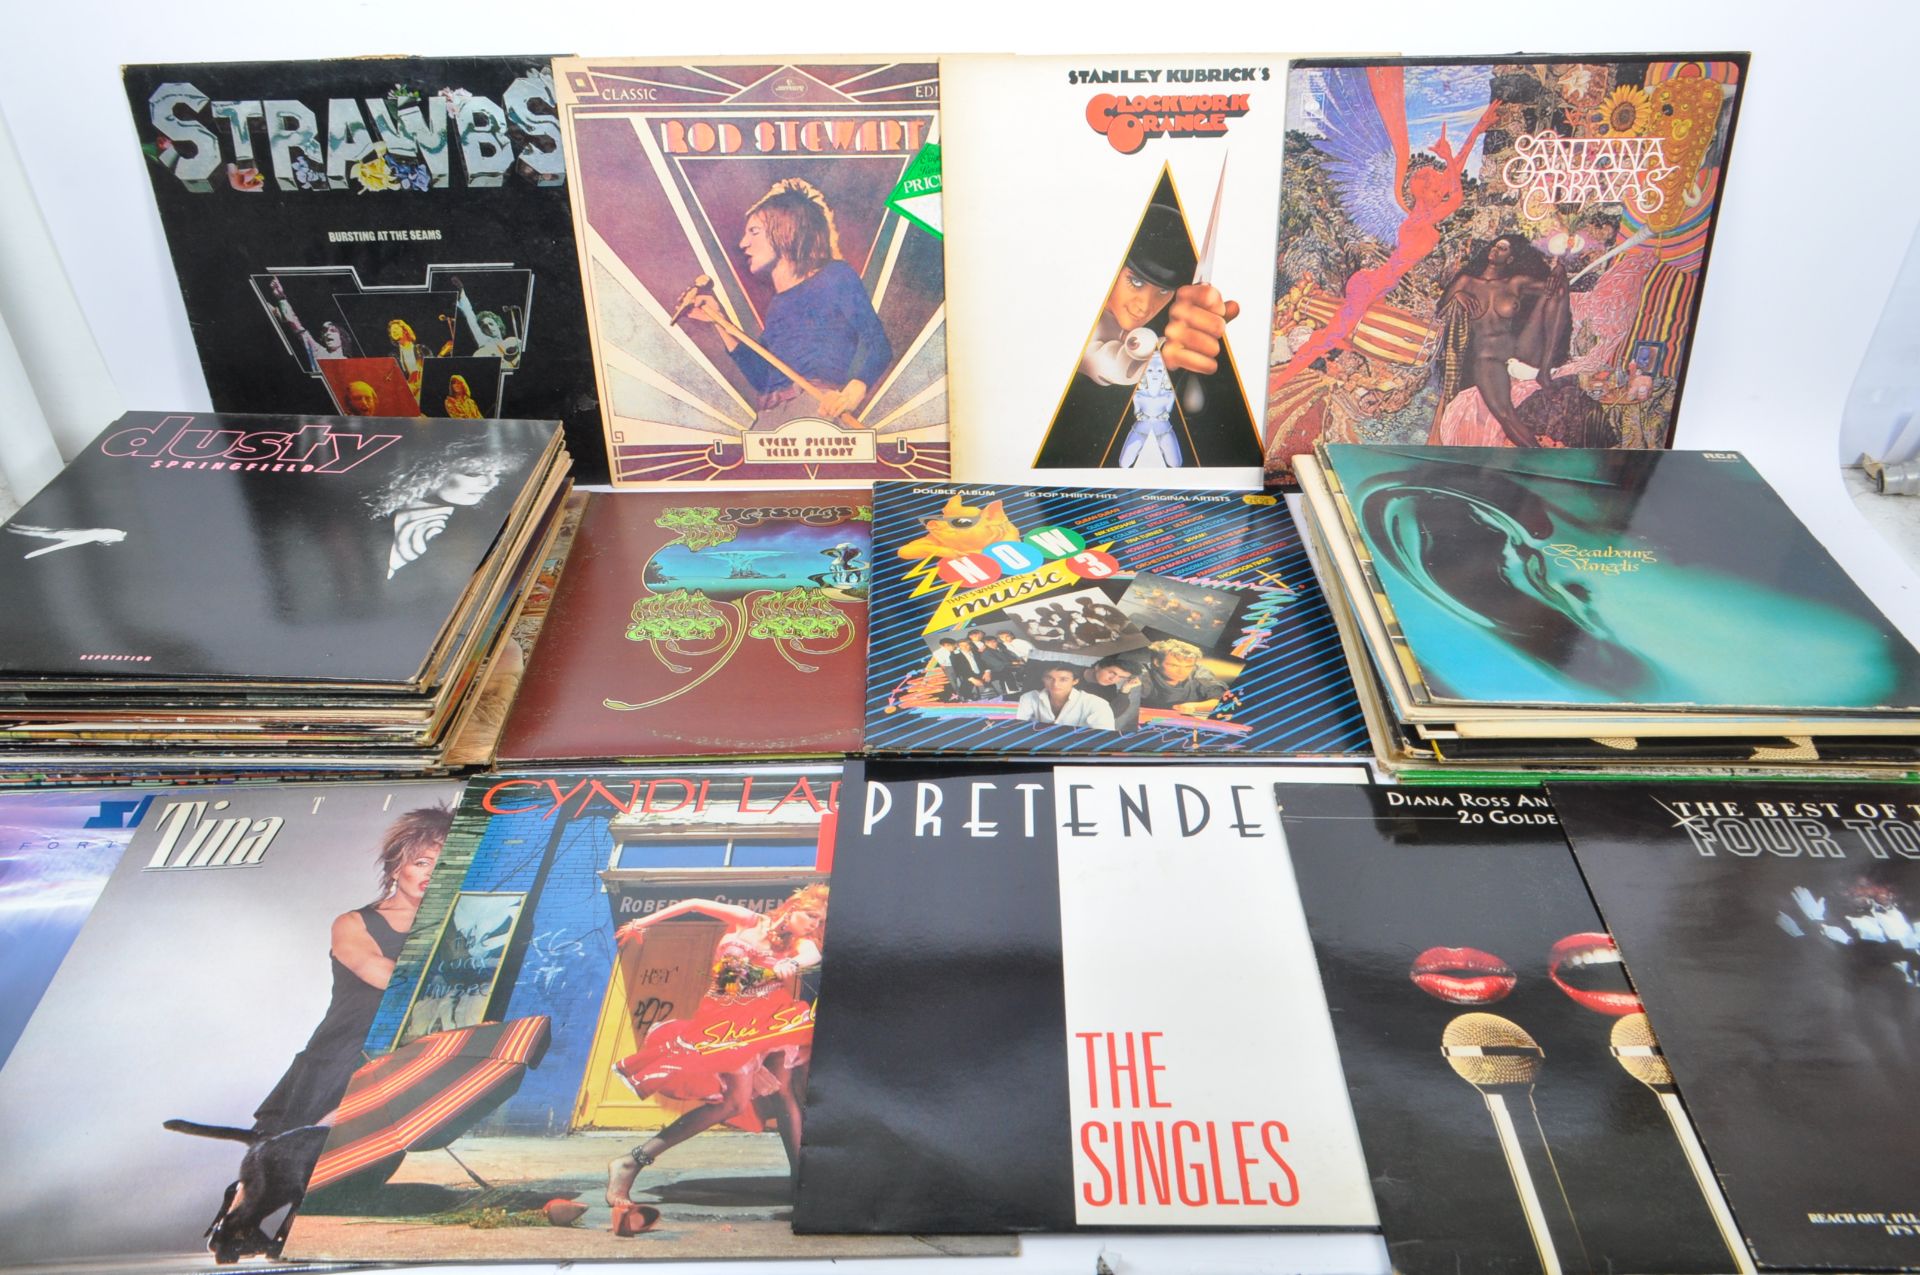 LARGE COLLECTION OF LONG PLAY 33 RPM VINYL RECORD ALBUMS